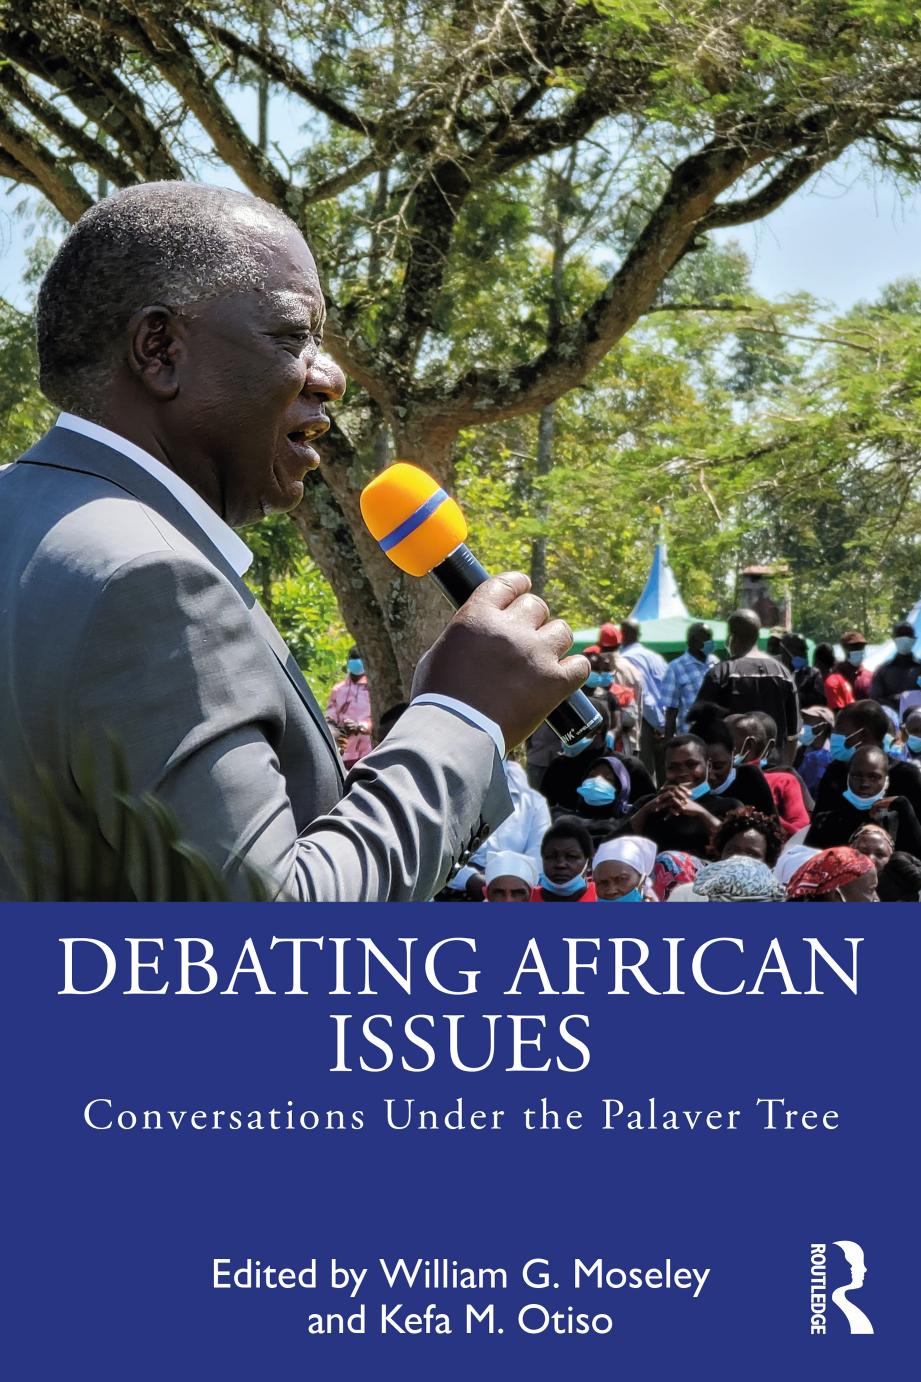 Debating African Issues: Conversations Under the Palaver Tree by William G. Moseley Kefa M. Otiso